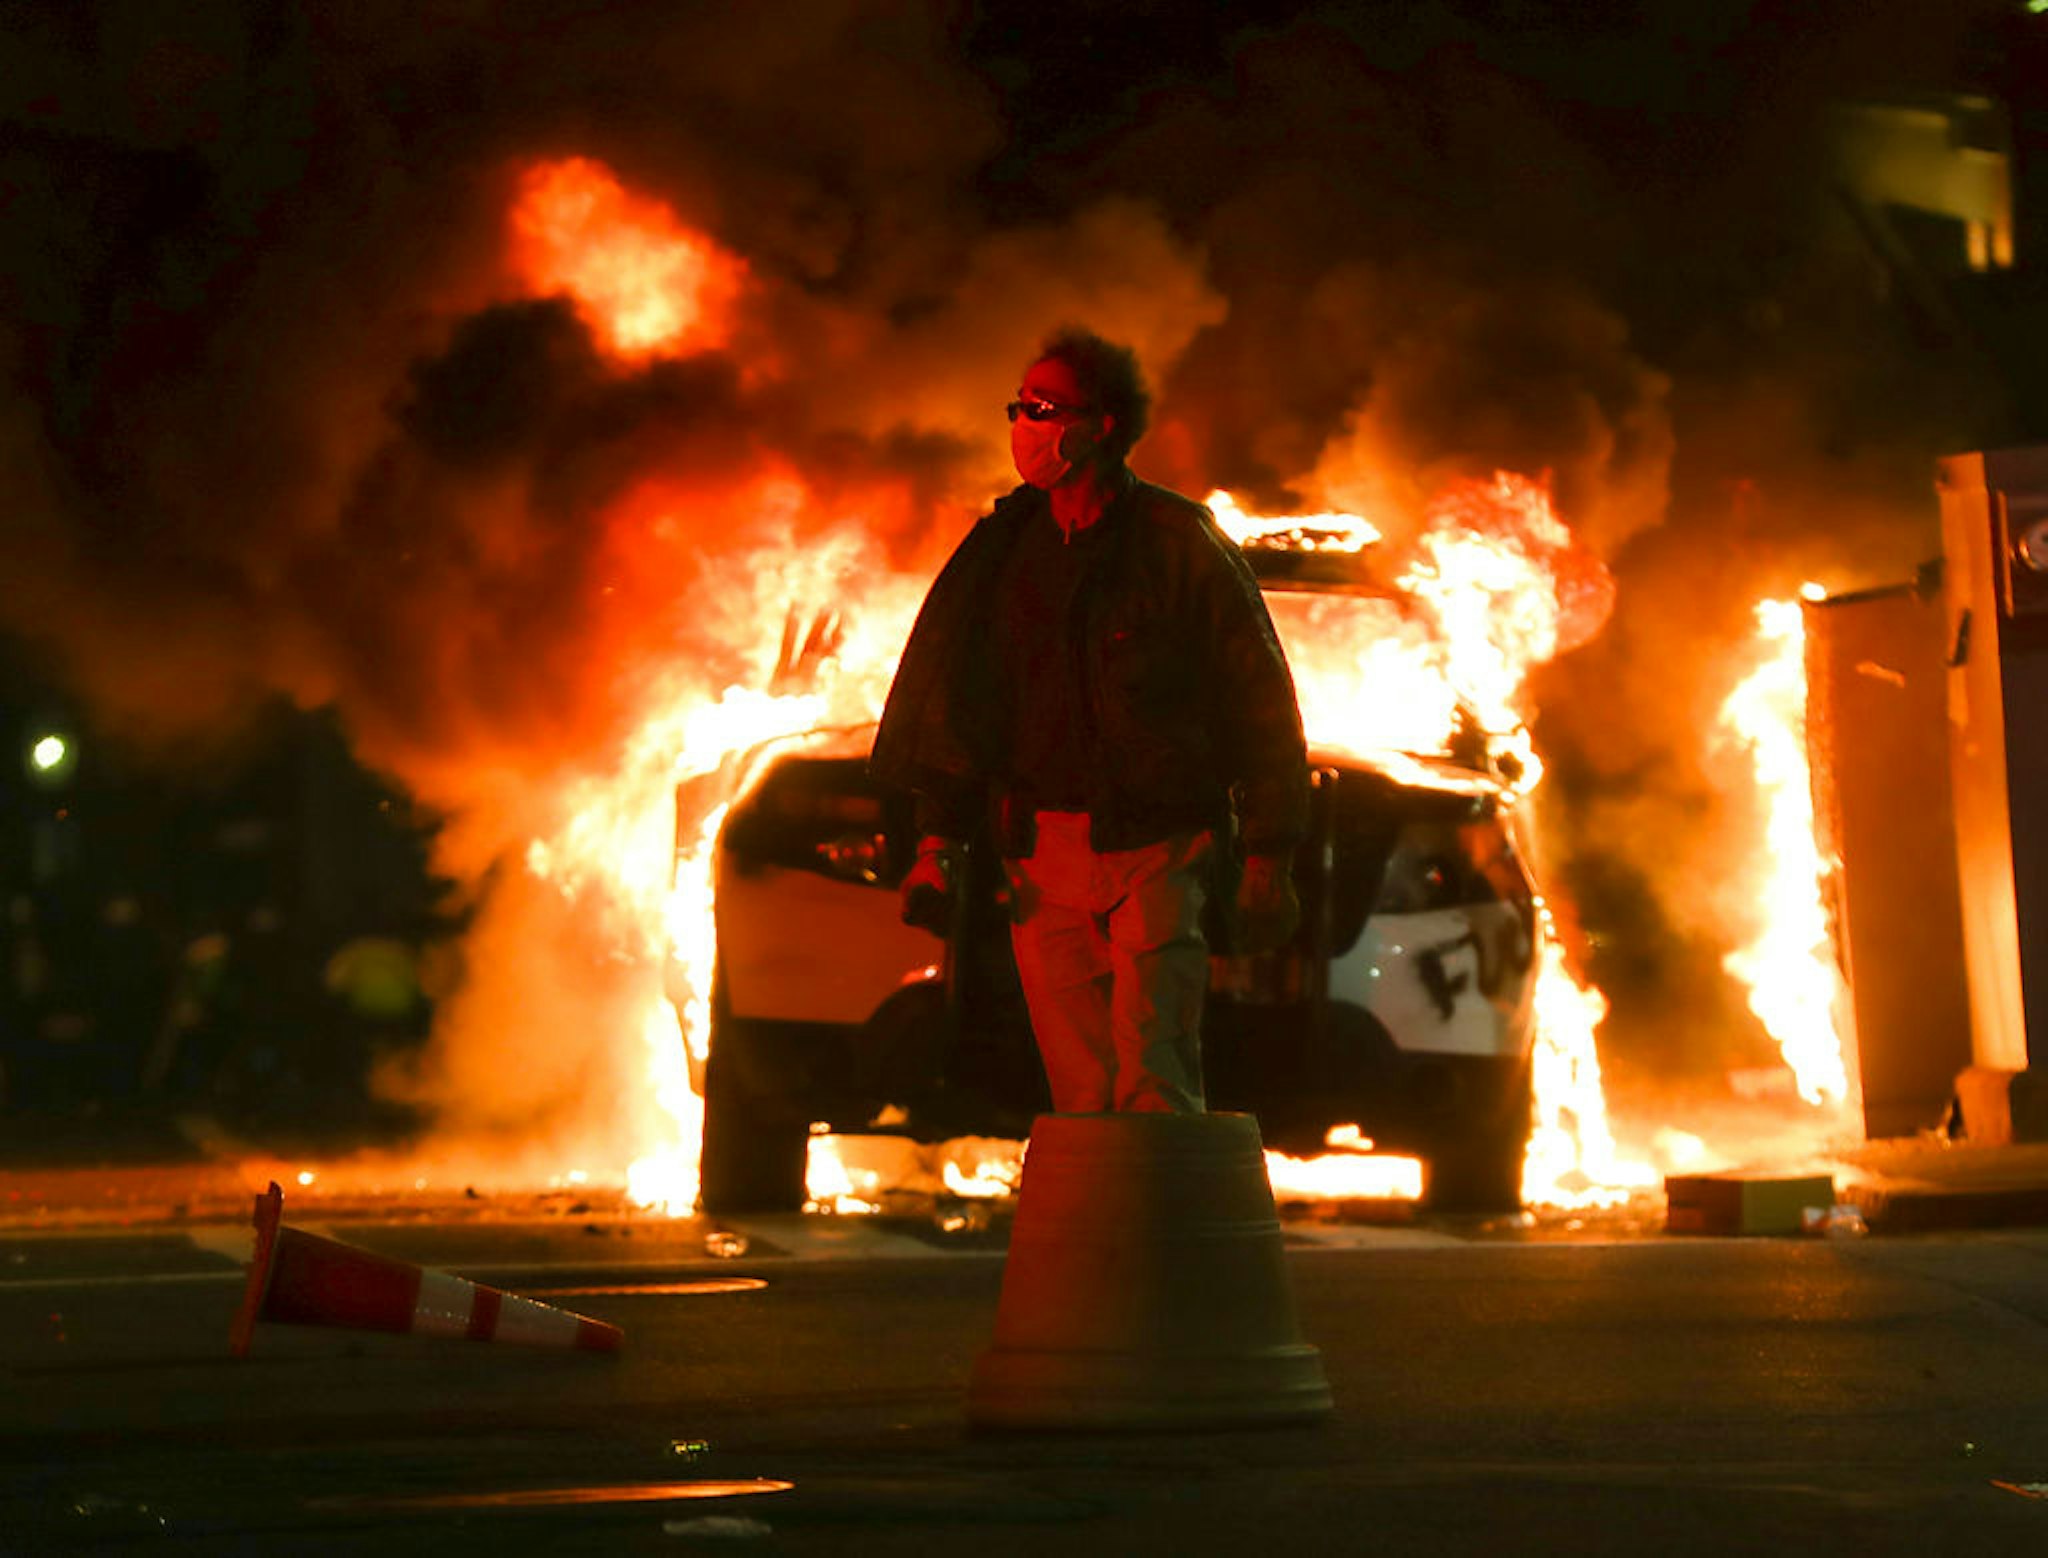 BOSTON, MA - JUNE 1: An unidentified man walks past a burning Boston Police car on Tremont Street in Boston on May 31, 2020 after a peaceful march from Dudley Square to the State House protesting the murder of George Lloyd by in Minneapolis by a police officer. (Photo by Matthew J. Lee/The Boston Globe via Getty Images)